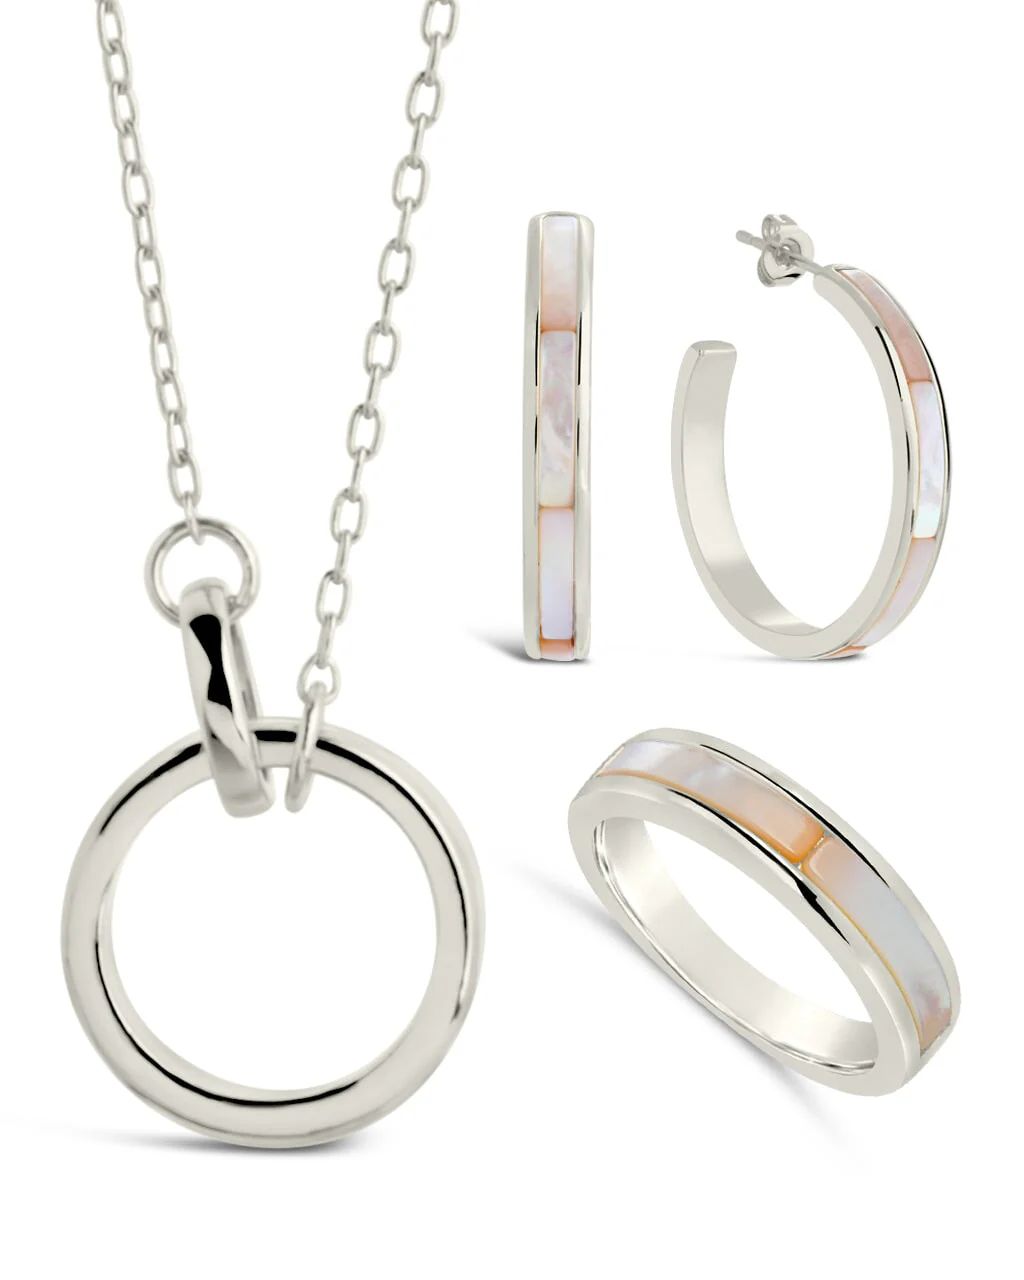 Mother of Pearl Band Ring, Hoop Earrings, & Pendant Necklace Set | Sterling Forever